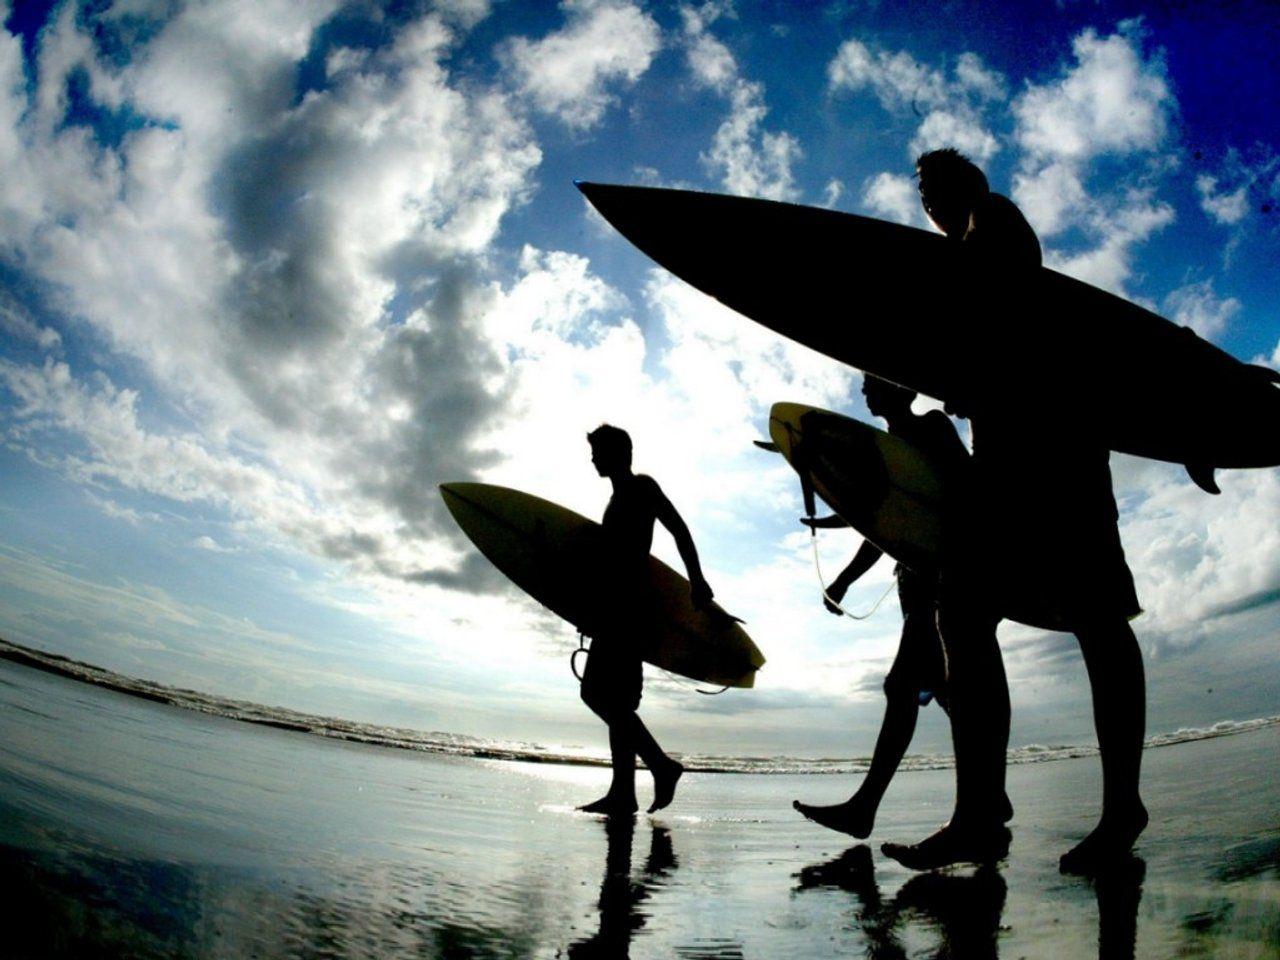 Best image about Surf. Surf, Surfer baby and Tahiti